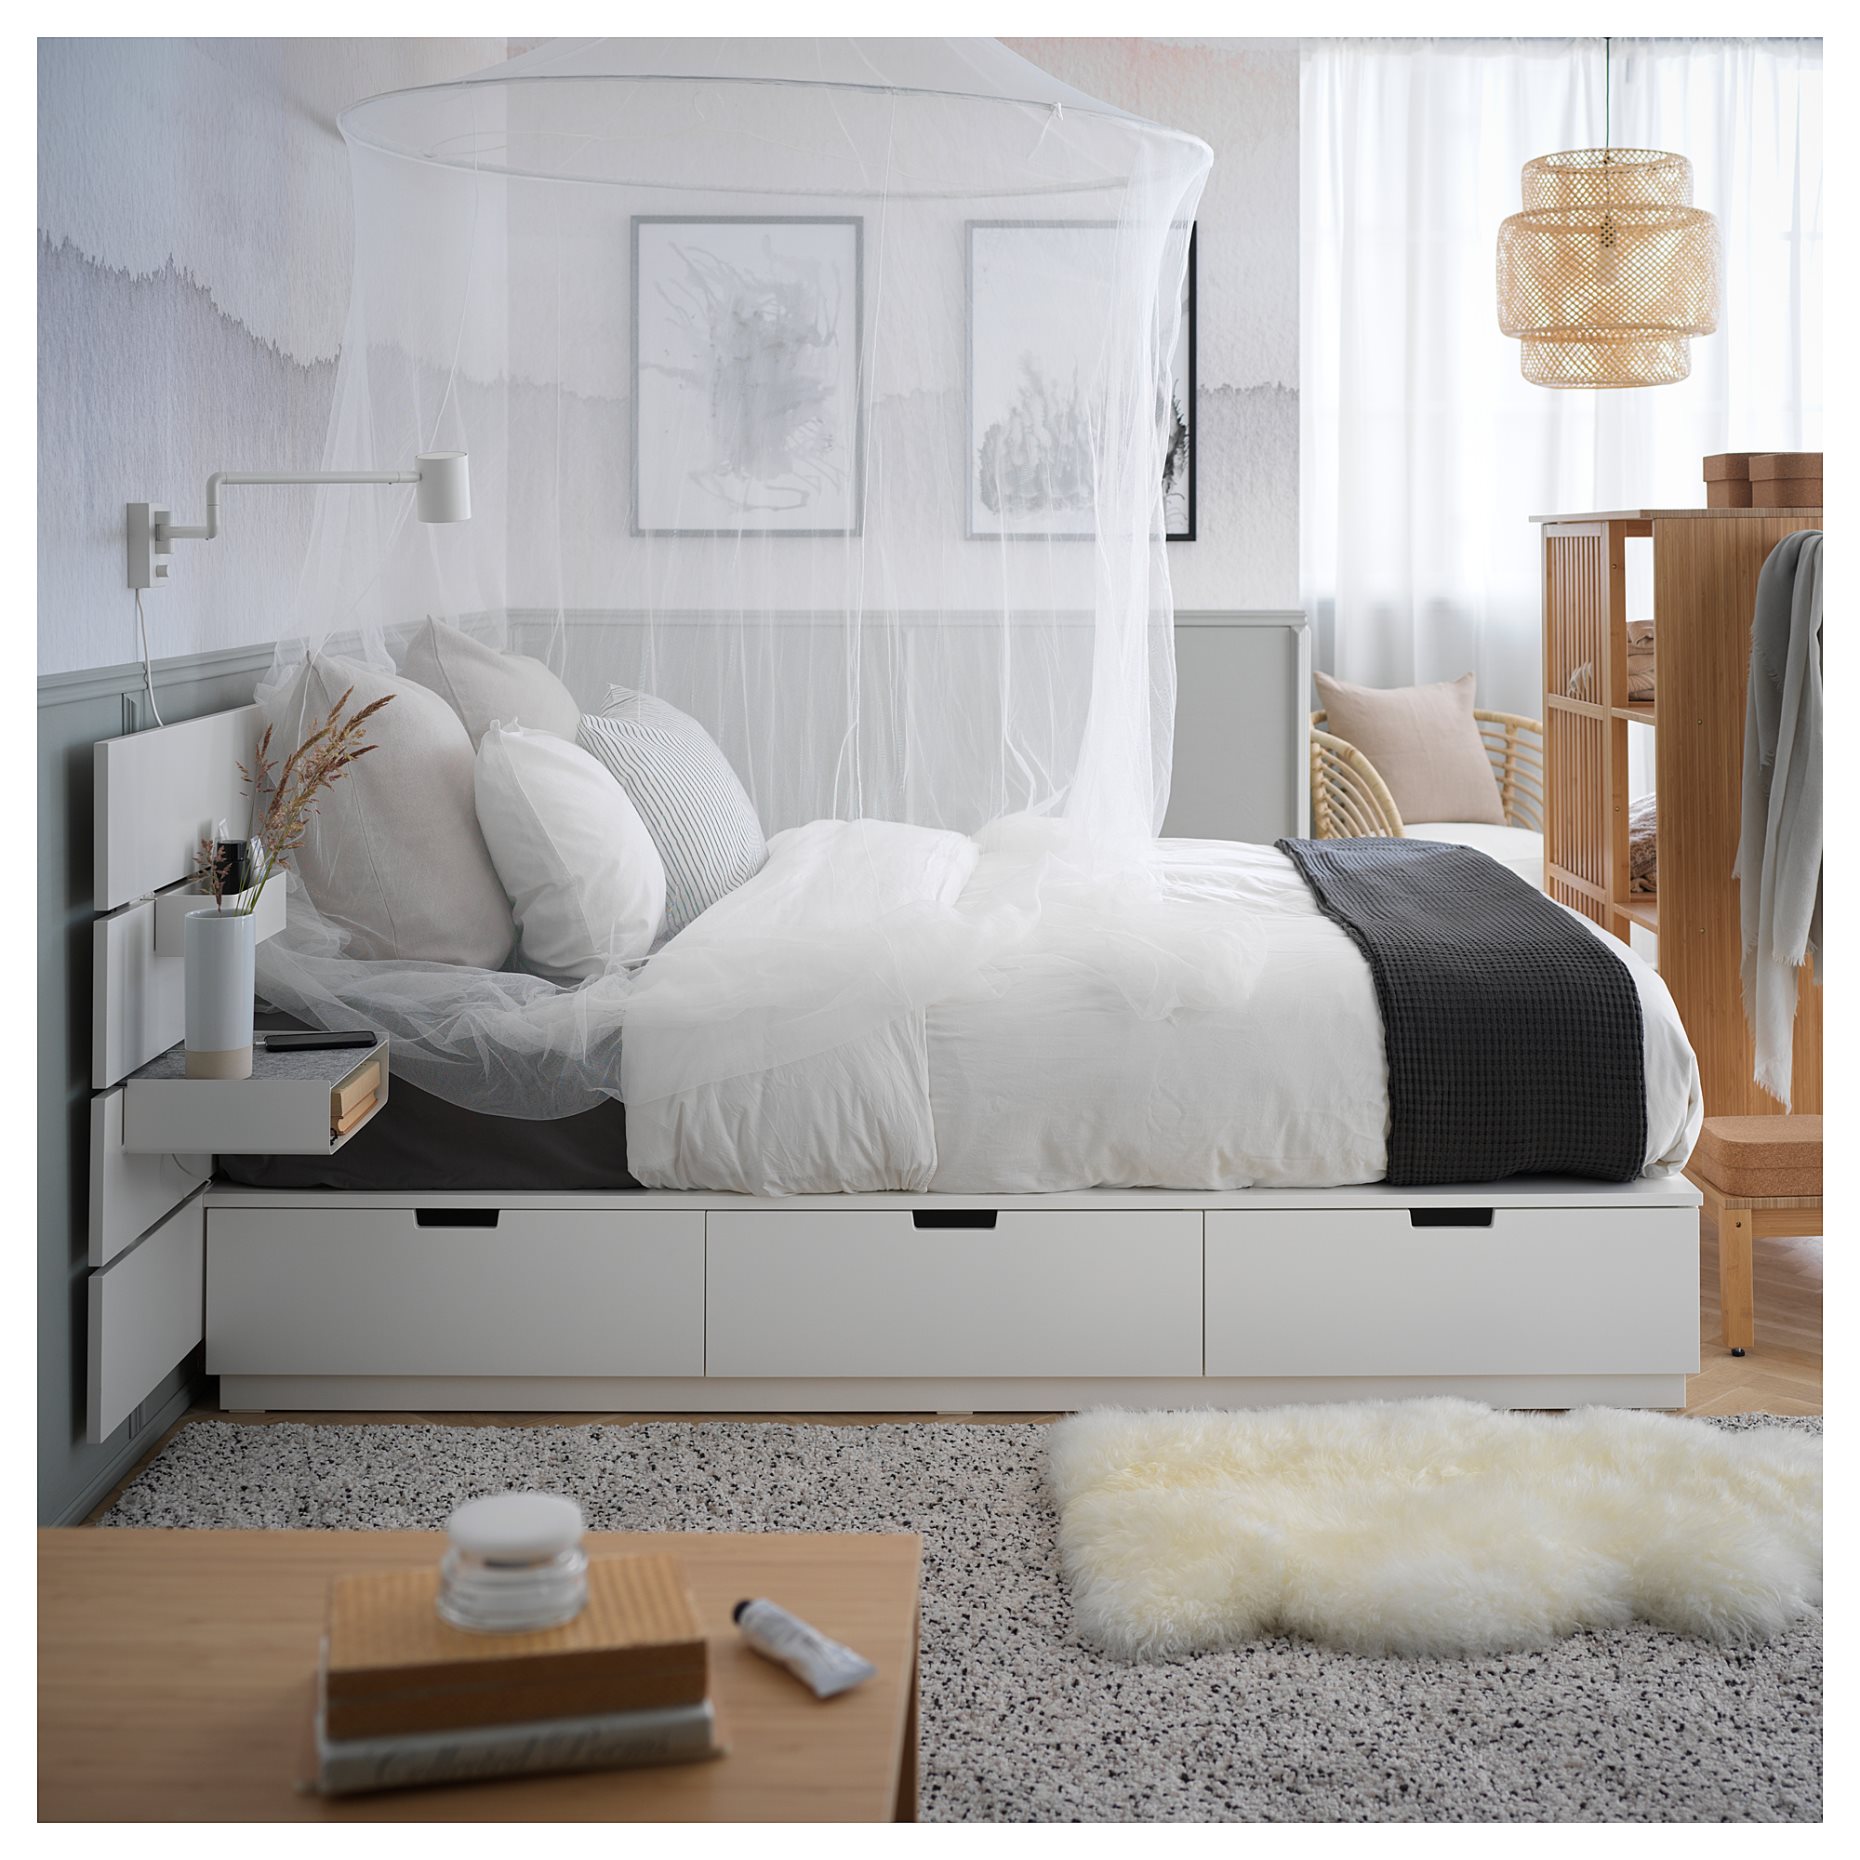 RINGSTA/SKAFTET, bed with storage and headboard, 140x200 cm, 092.414.20